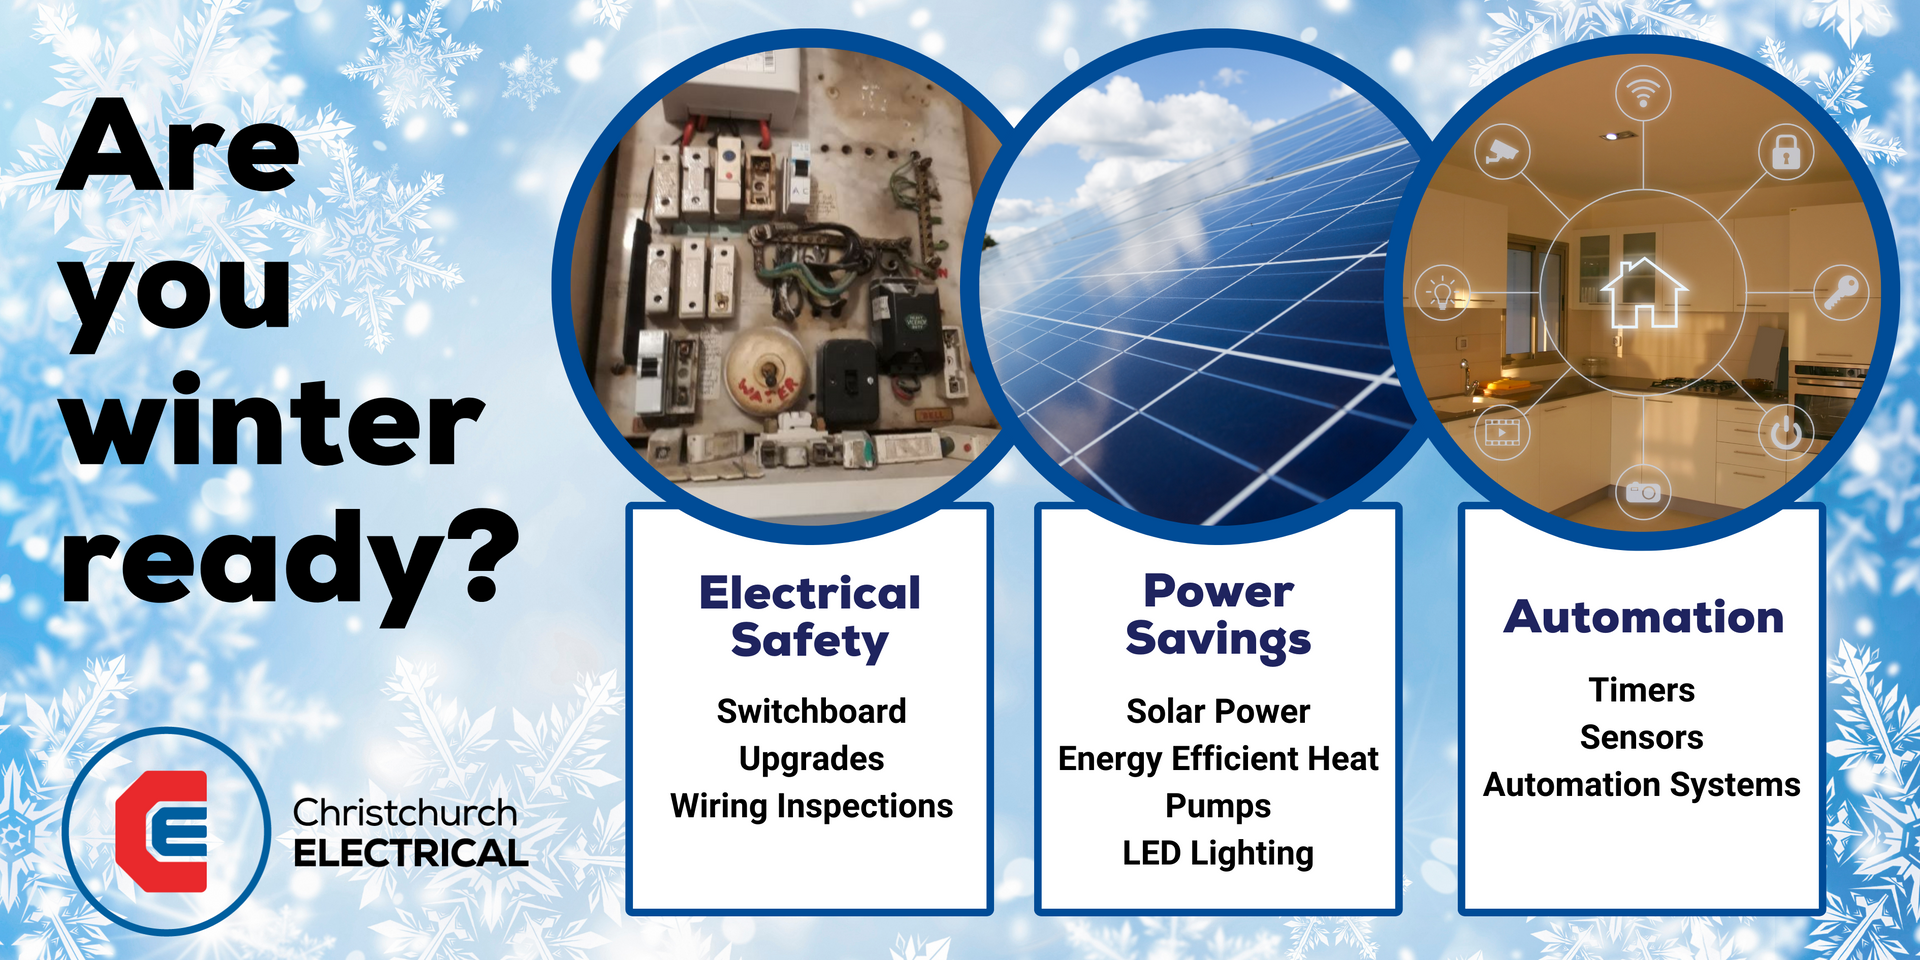 Are you winter ready? Graphics to depict electrical safety, power savings and automation